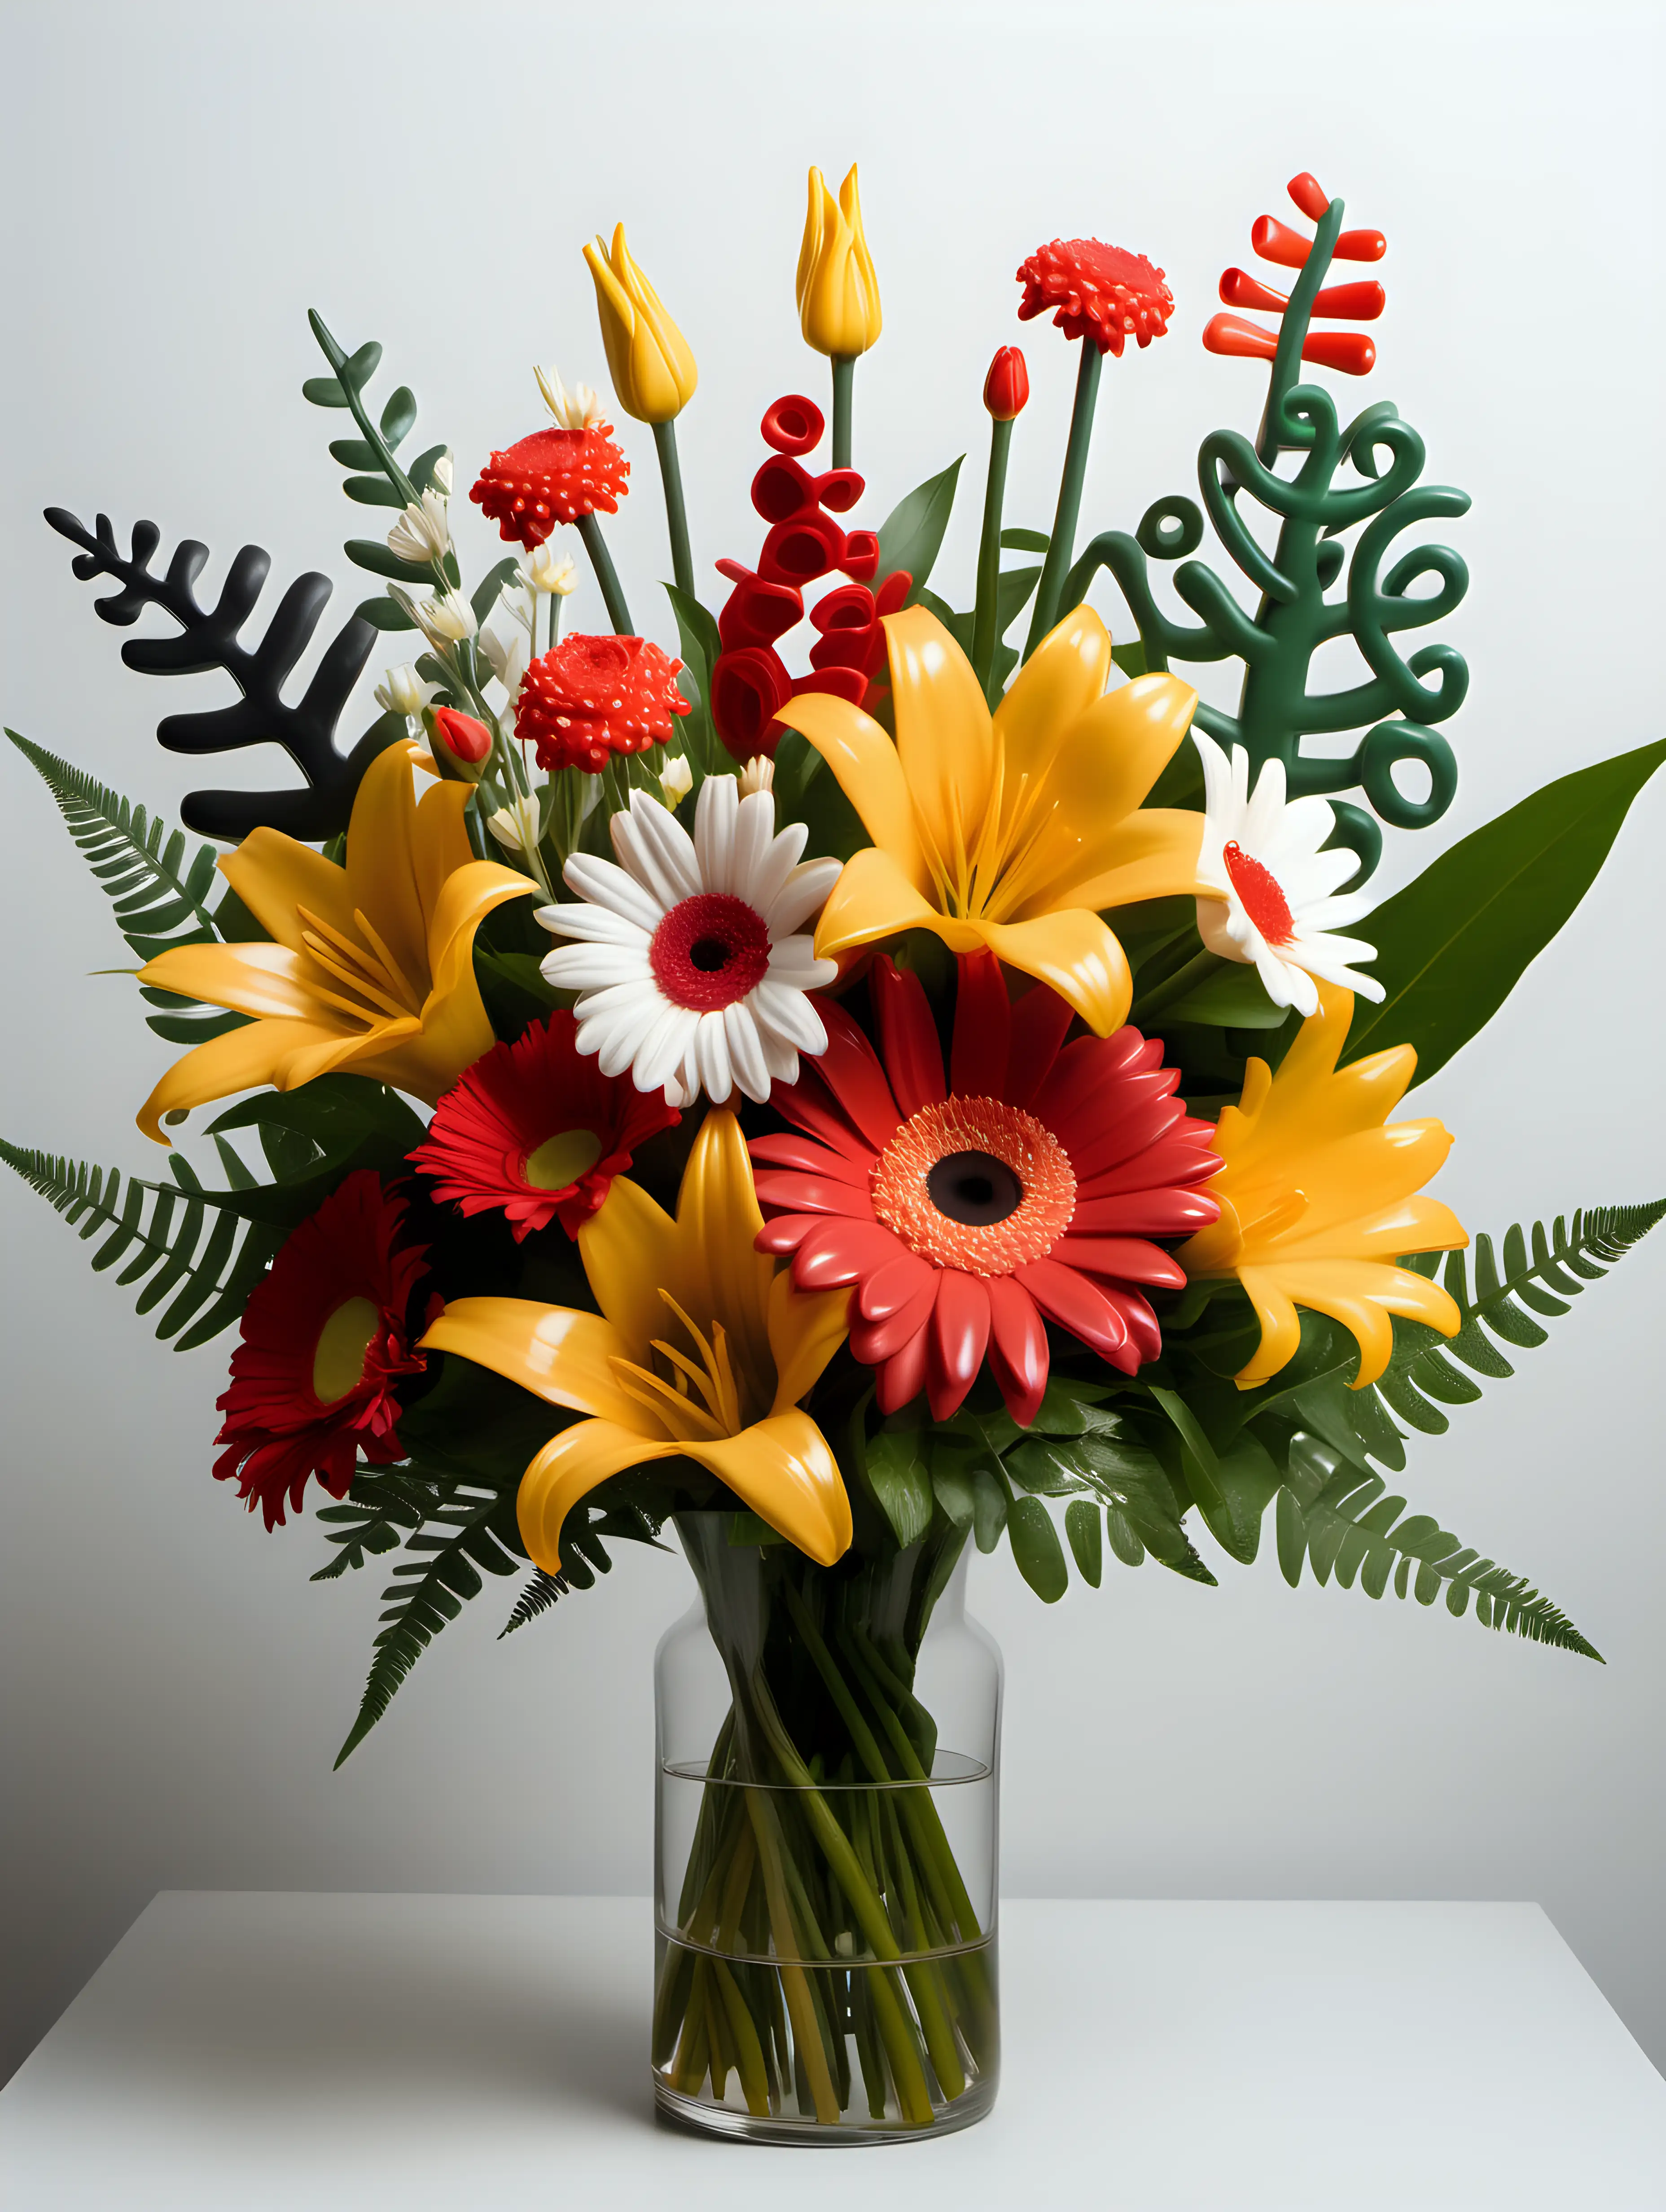 create a bouquet of primarily of Honeysuckle with accents of Tulips, Daffodils, Red Roses, Gerbera daisies, carnations, baby breath, eucalyptus and ferns flowers with stem visible on white background, inspired by the artist Keith Haring